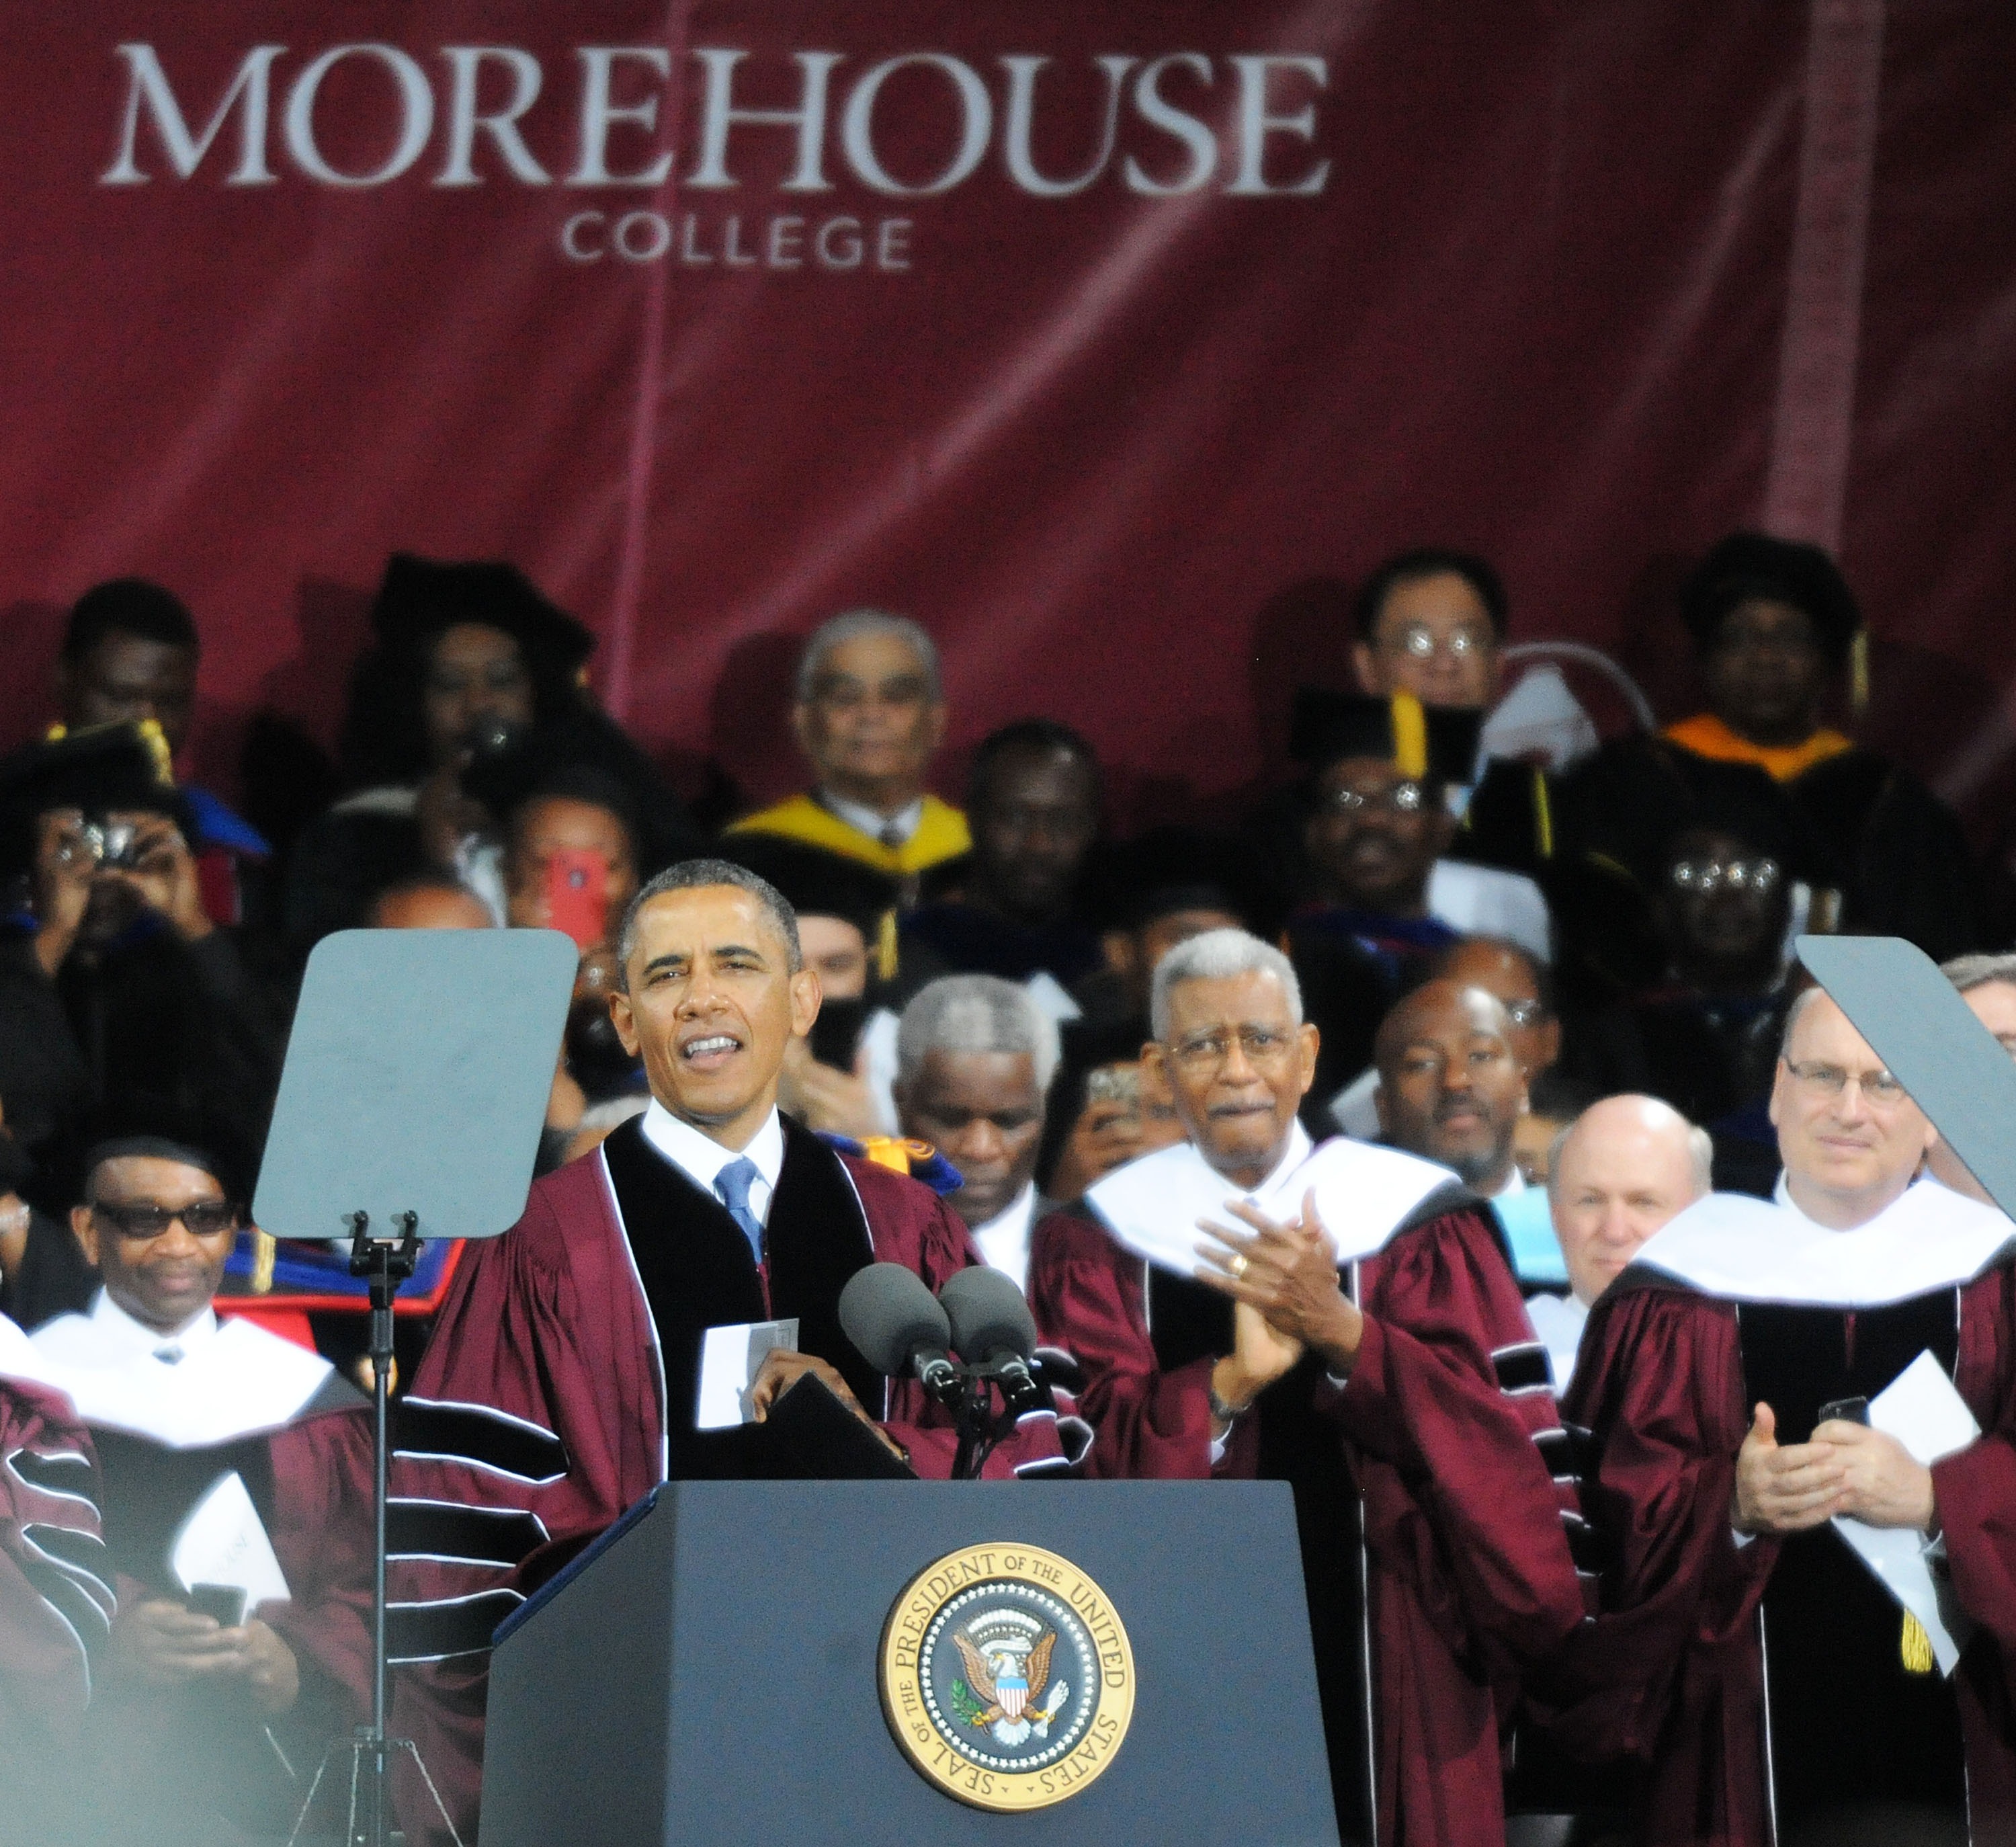 President Obama delivers remarks during the Morehouse College commencement on May 19, 2013 in Atlanta, Georgia. (Chris McKay—WireImage/Getty Images)